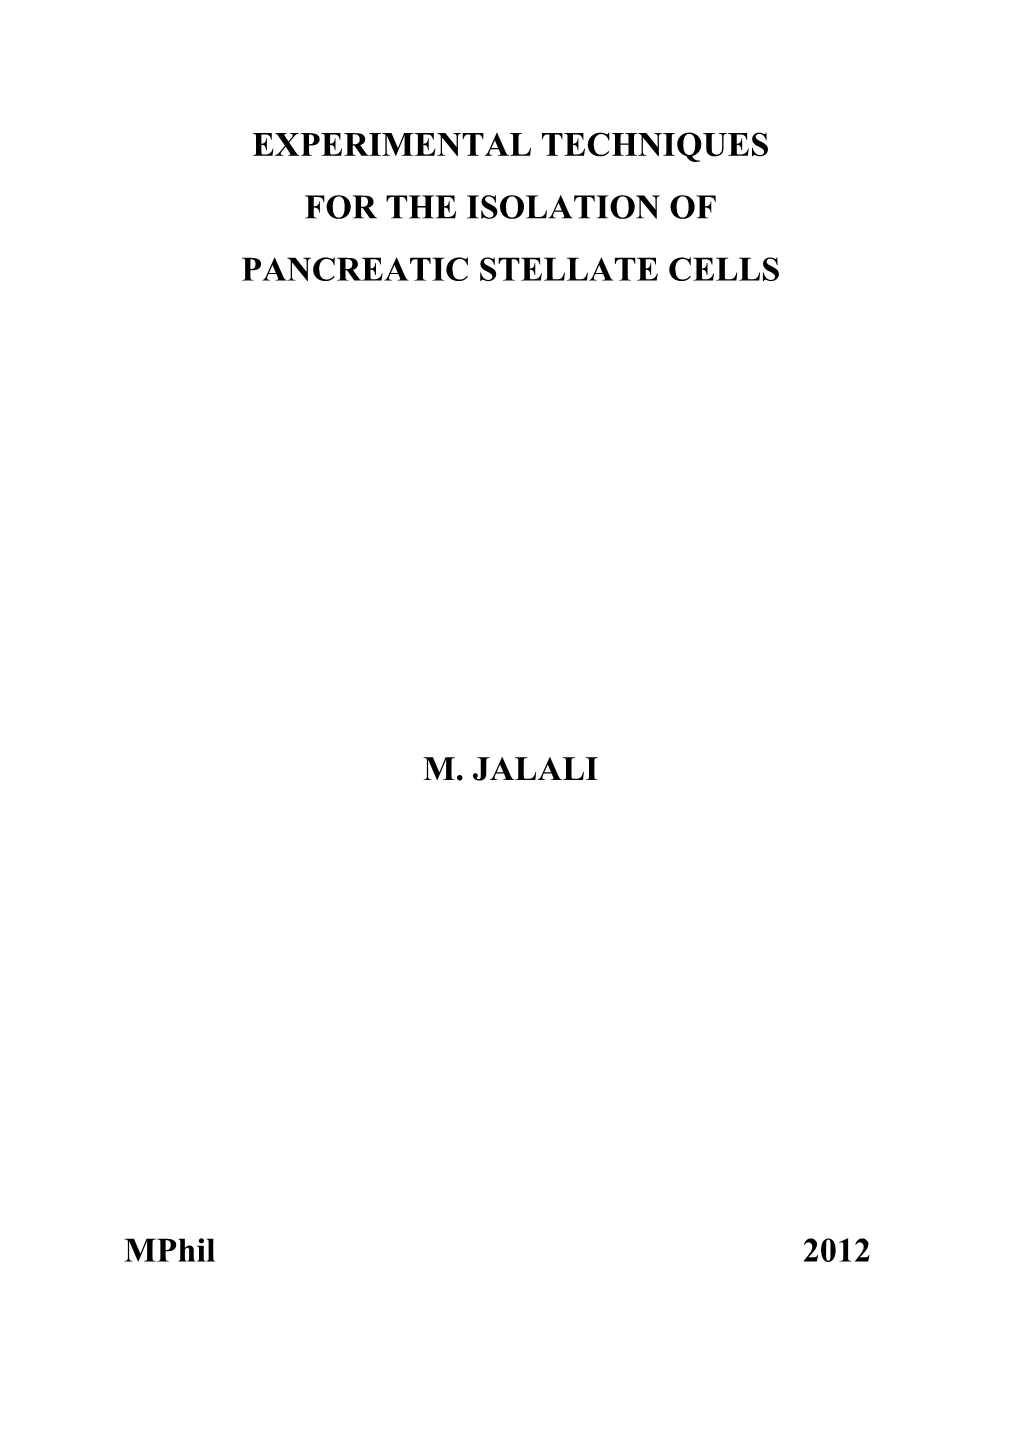 EXPERIMENTAL TECHNIQUES for the ISOLATION of PANCREATIC STELLATE CELLS M. JALALI Mphil 2012